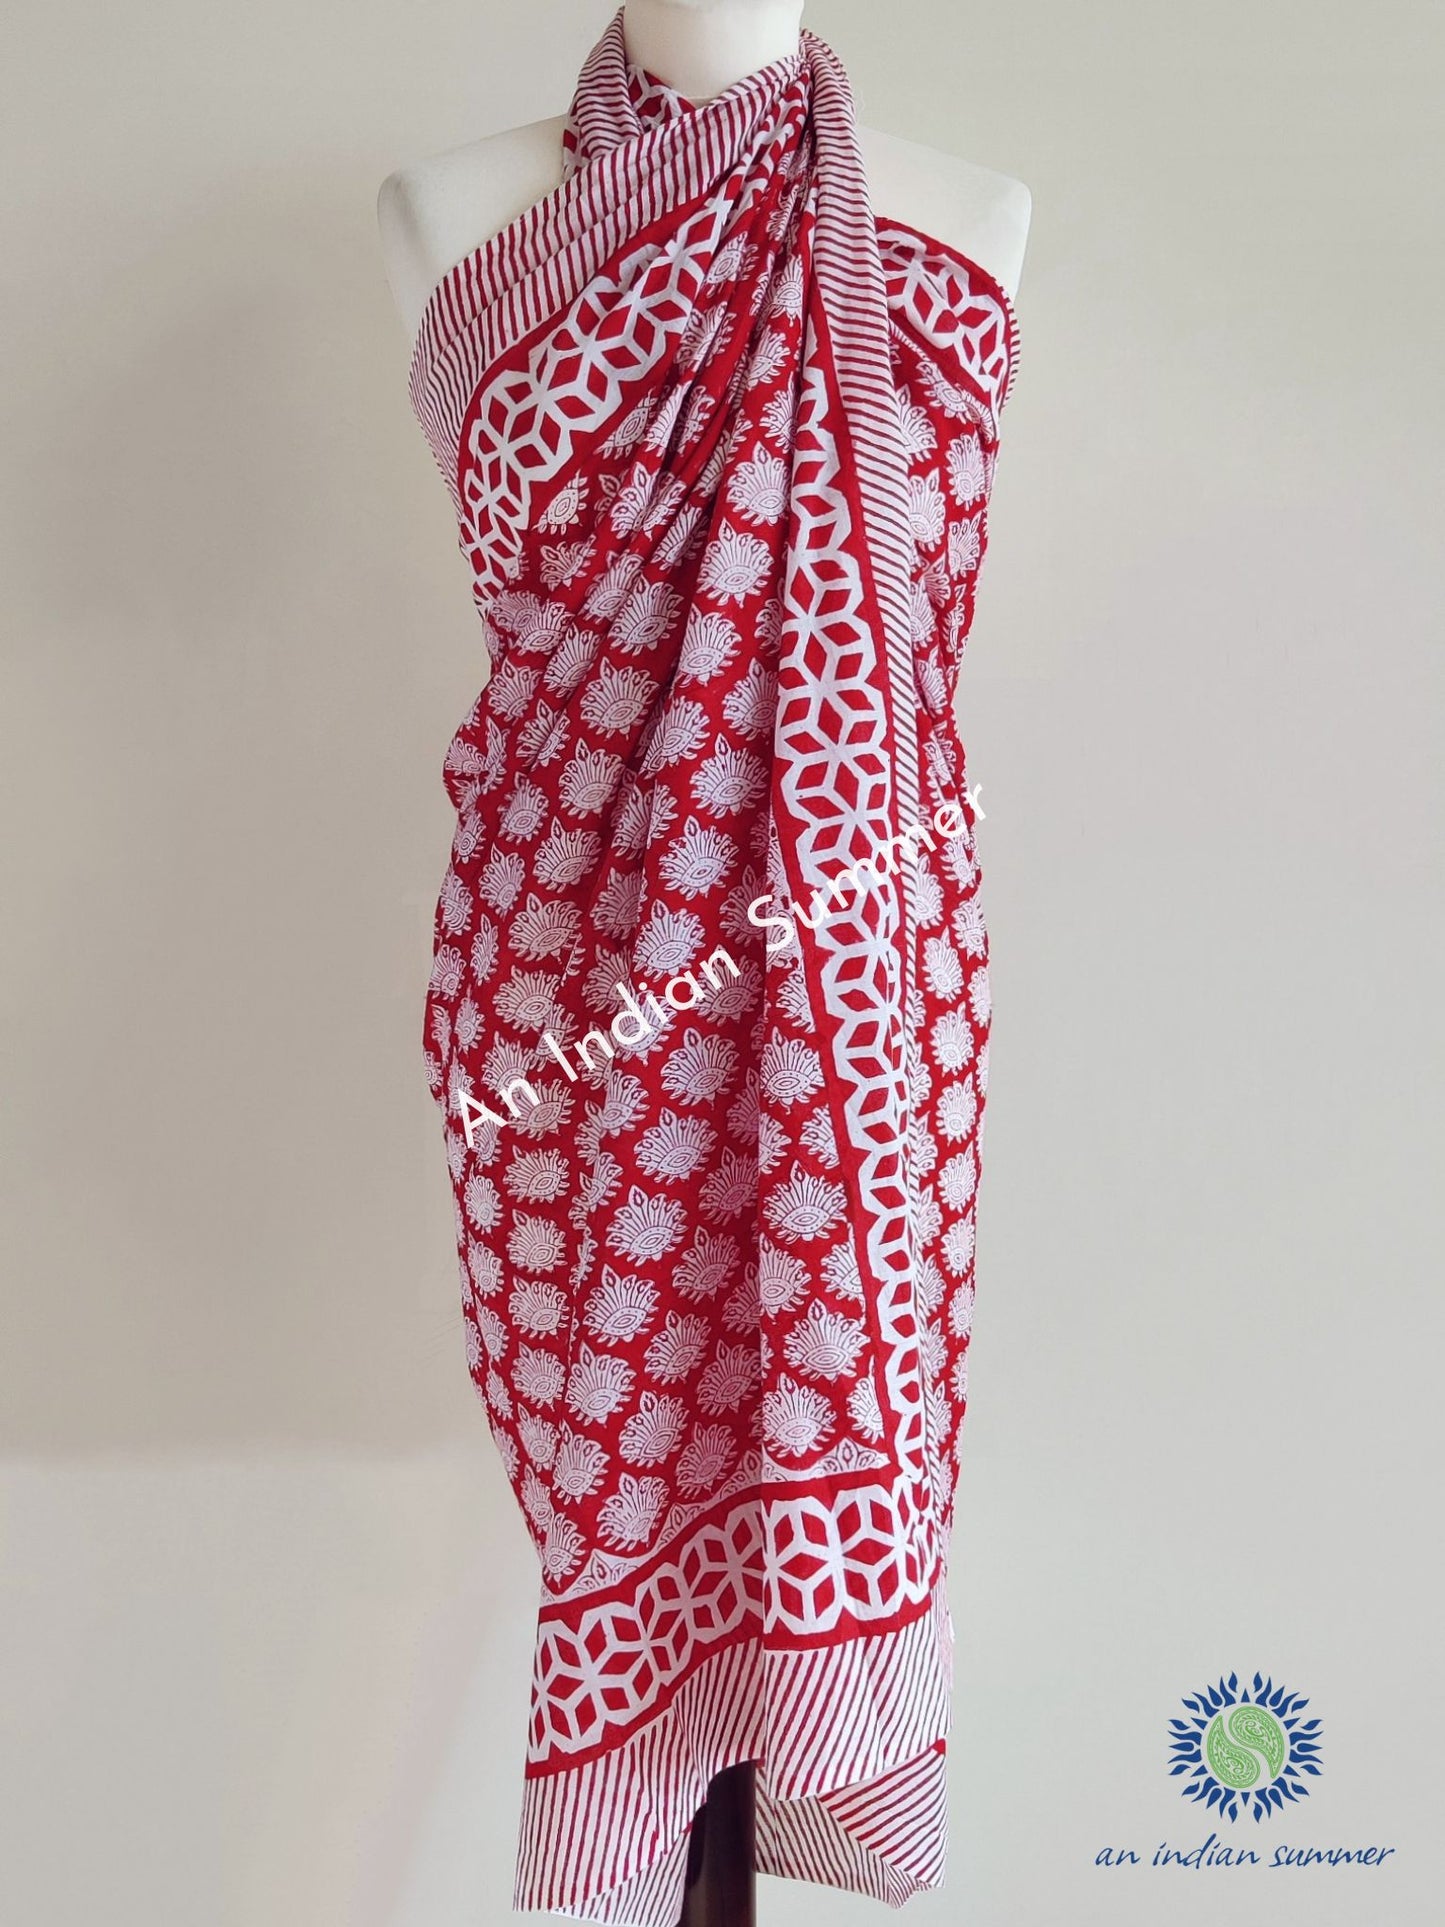 Fern Sarong Pareo | Red | Hand Block Printed | Soft Cotton Voile | An Indian Summer | Seasonless Timeless Sustainable Ethical Authentic Artisan Conscious Clothing Lifestyle Brand